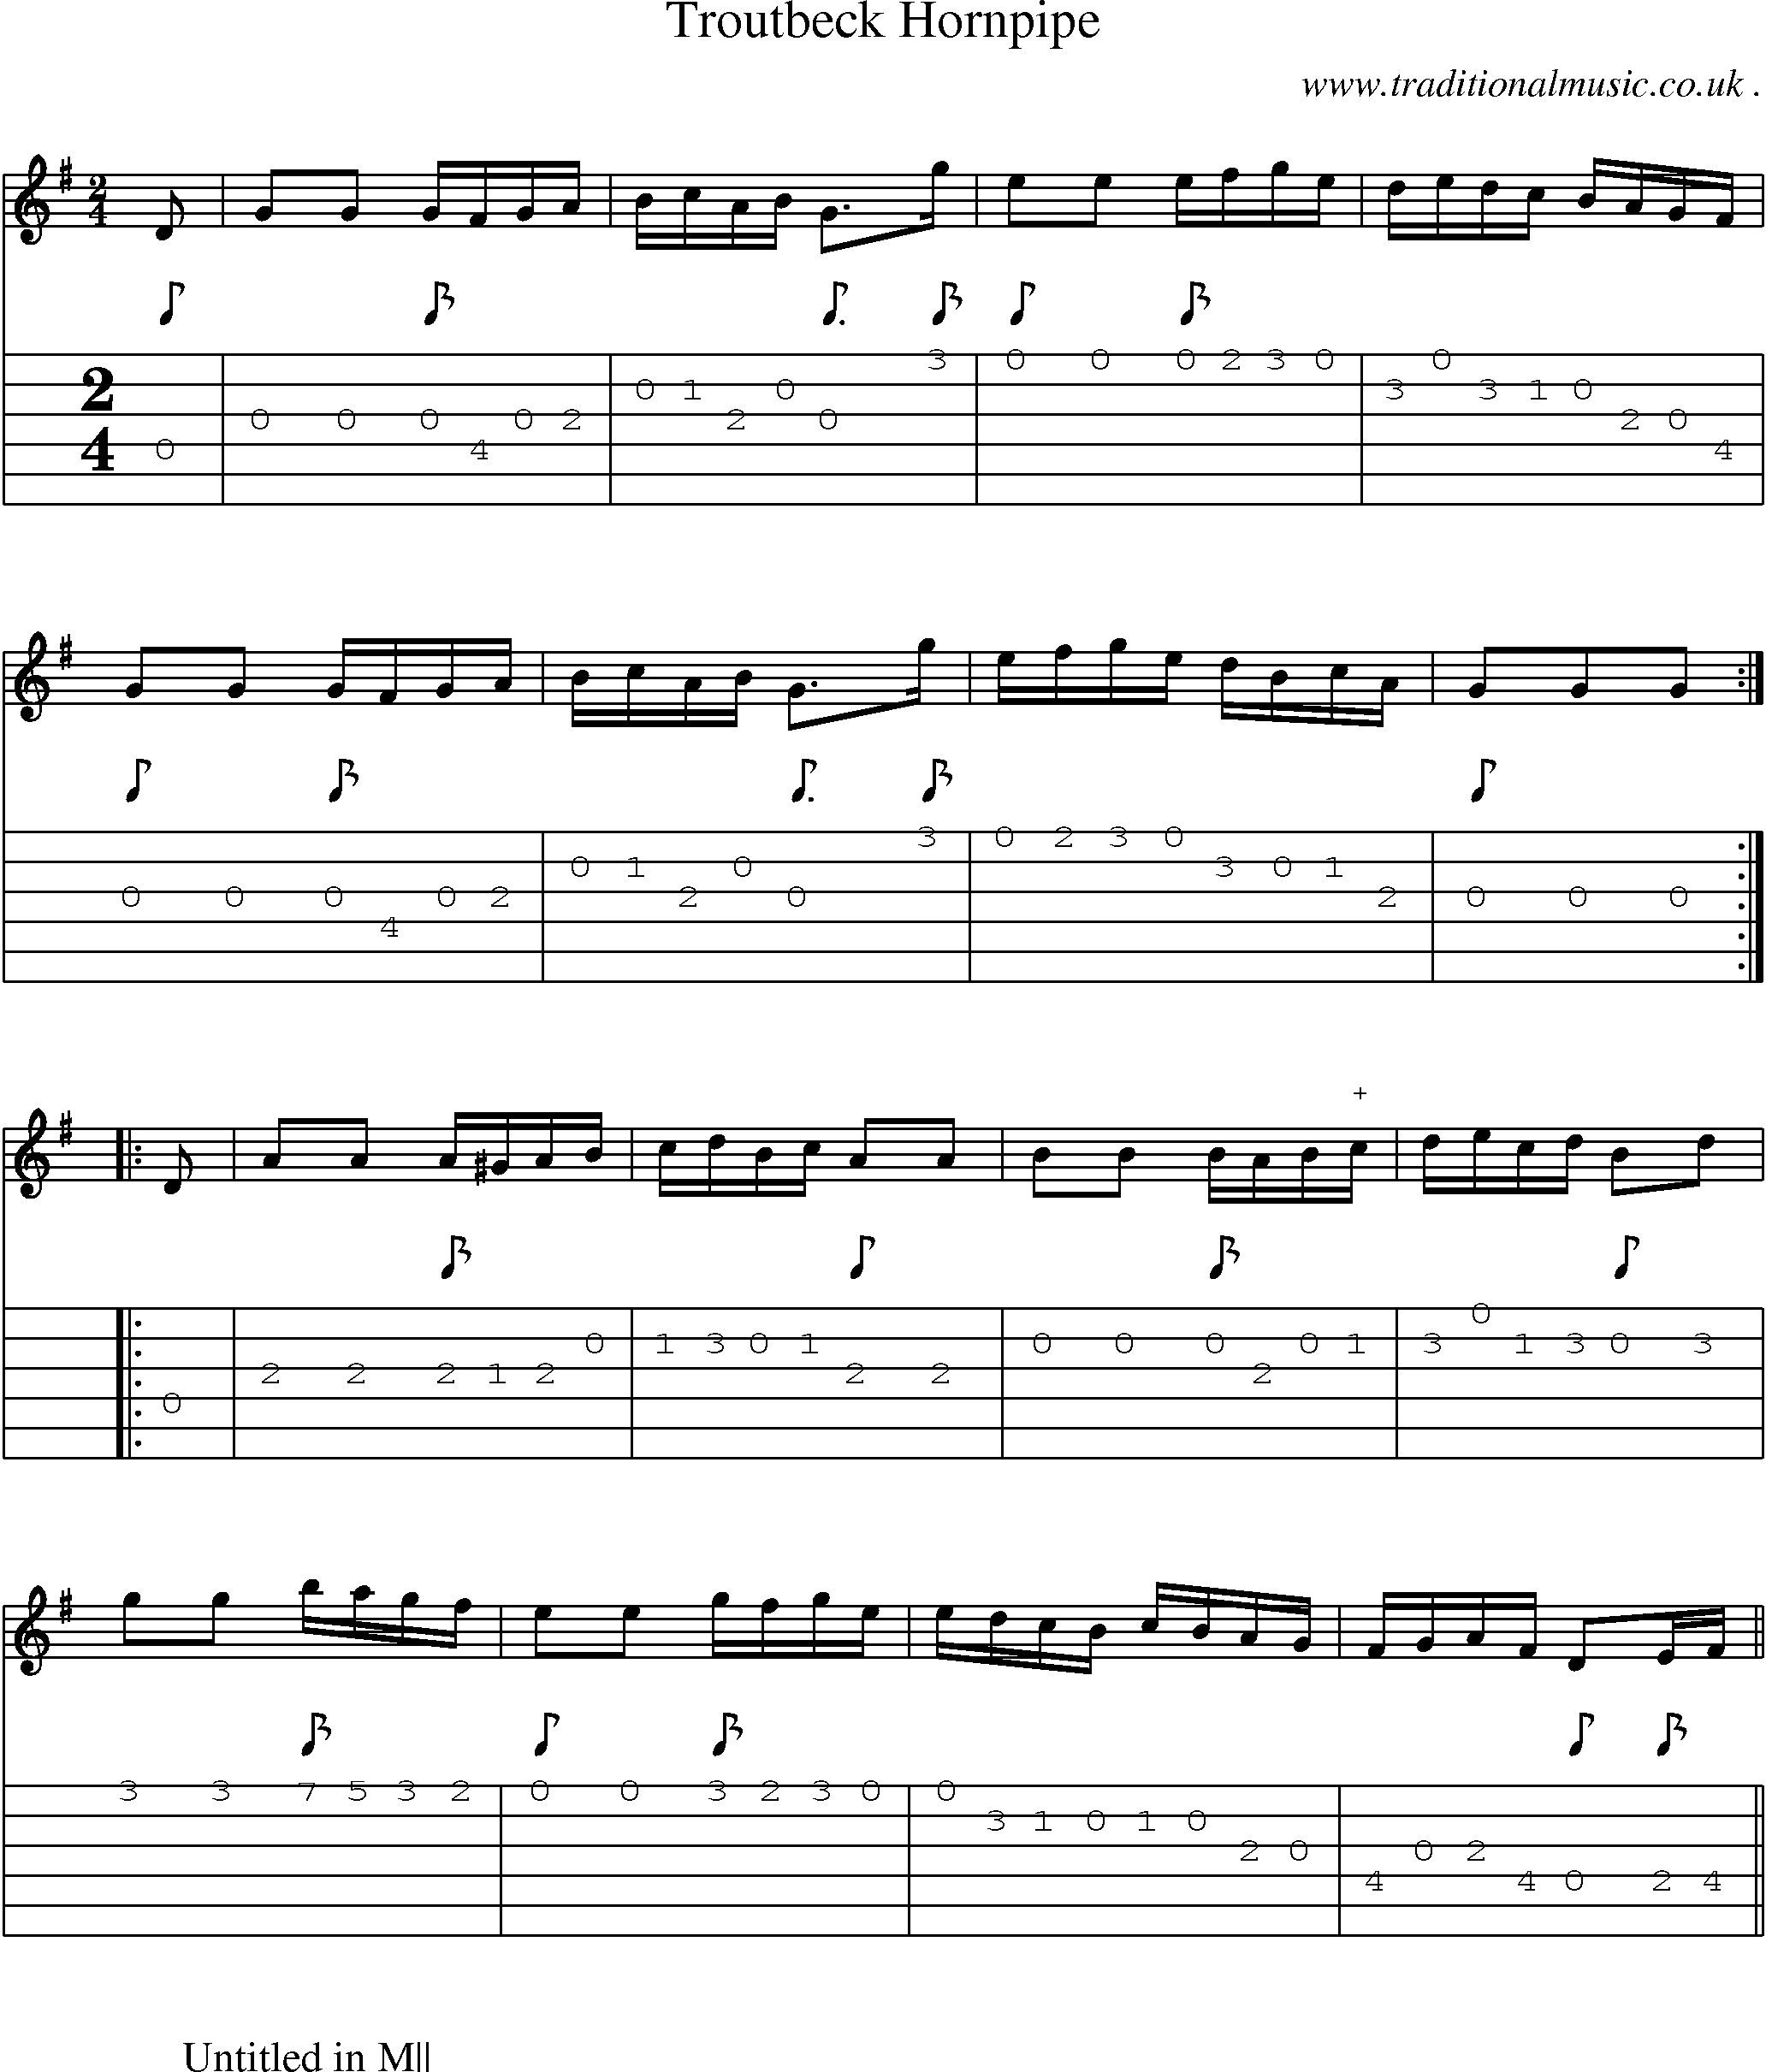 Sheet-Music and Guitar Tabs for Troutbeck Hornpipe